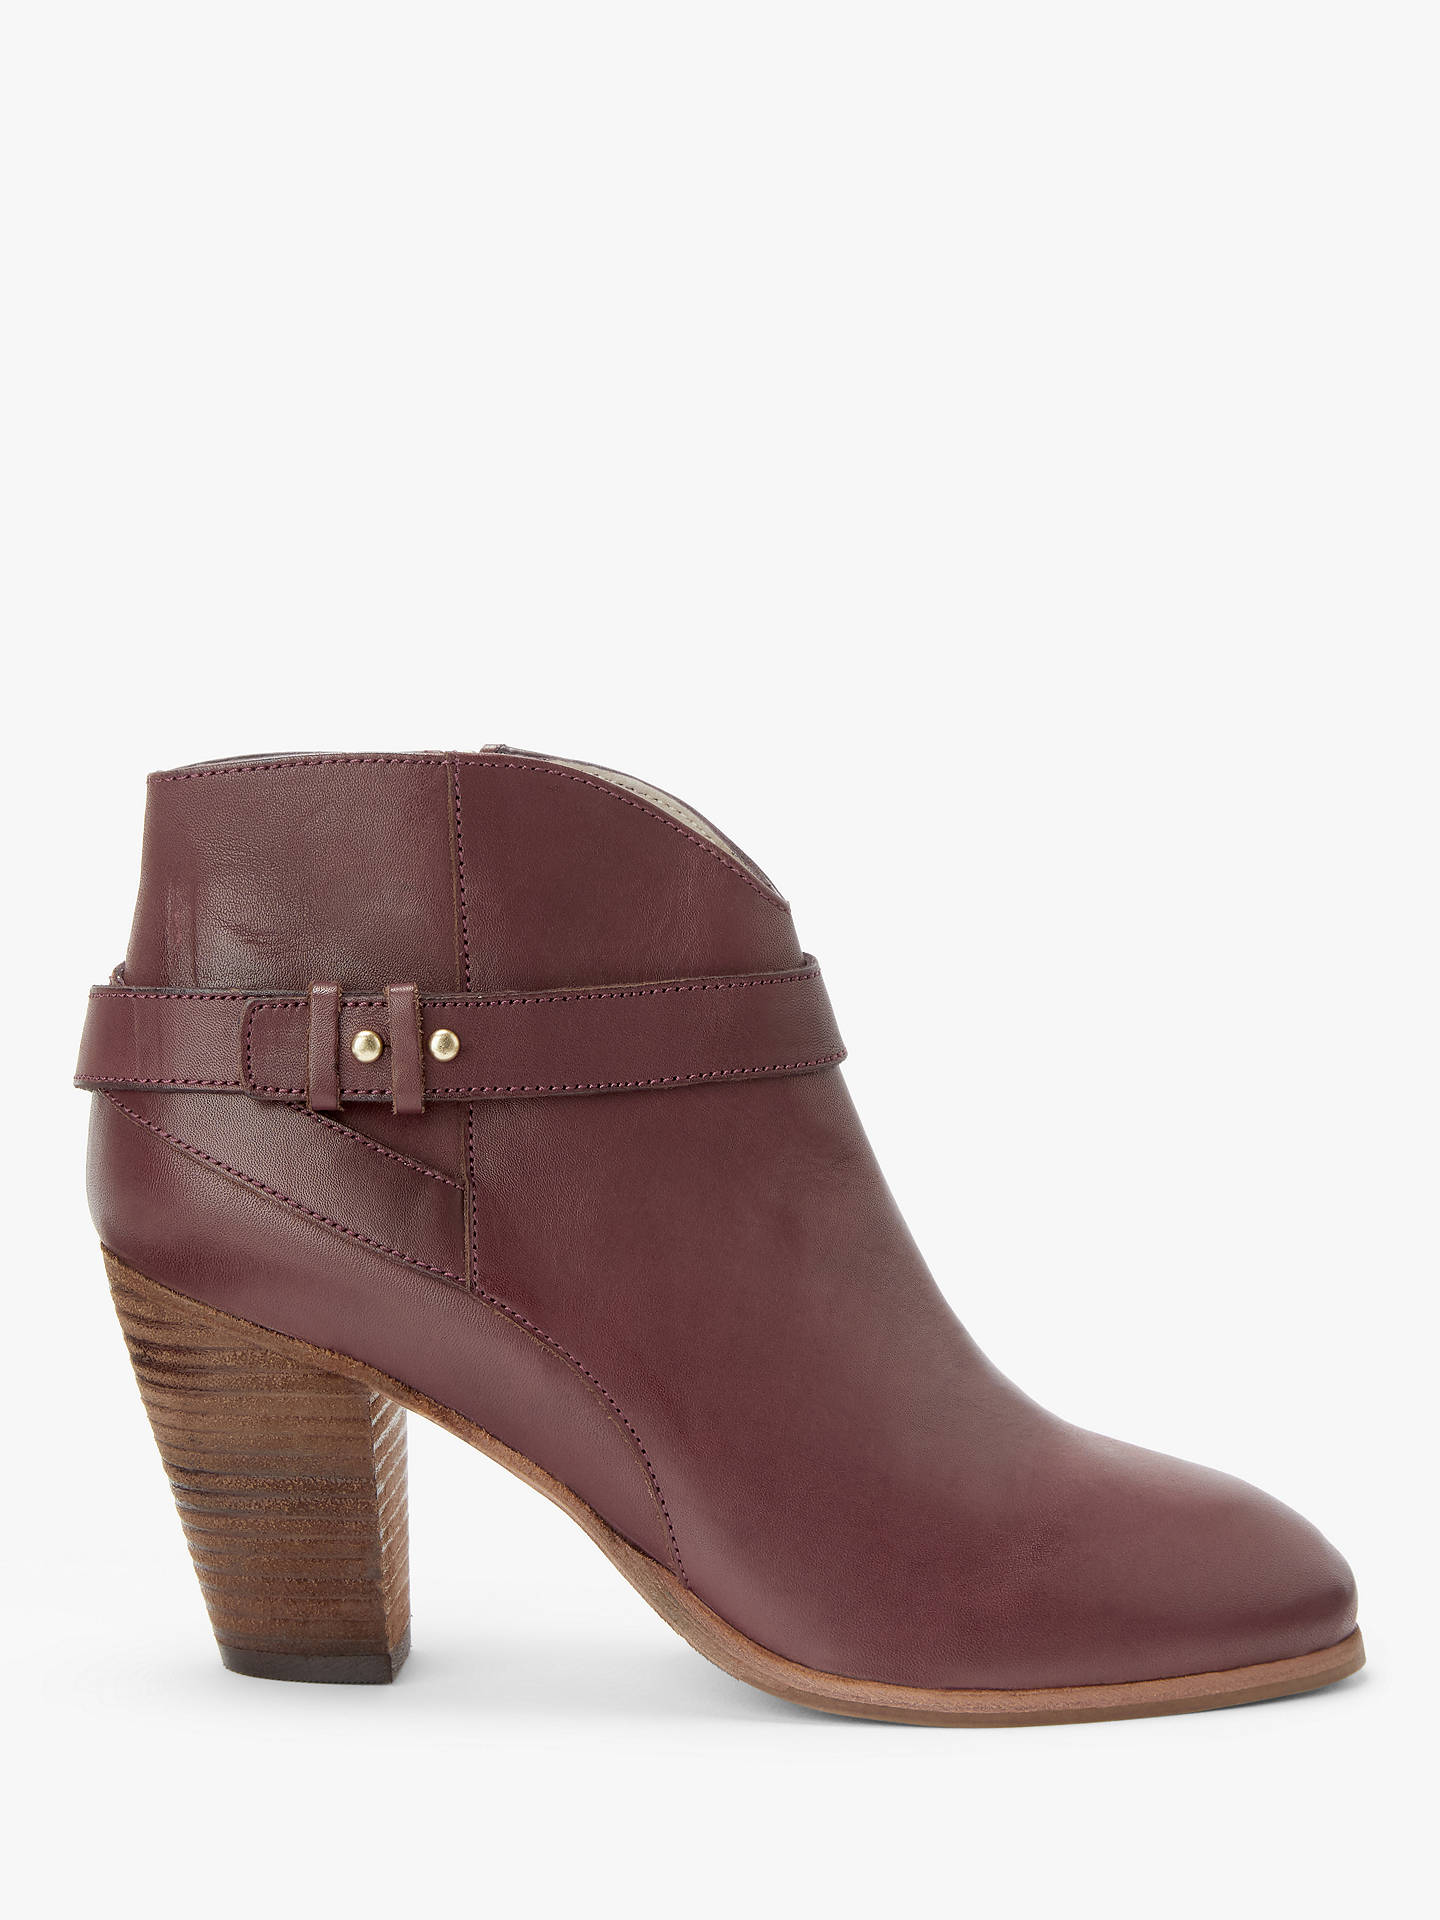 Boden Stratford Leather Heeled Ankle Boots at John Lewis & Partners